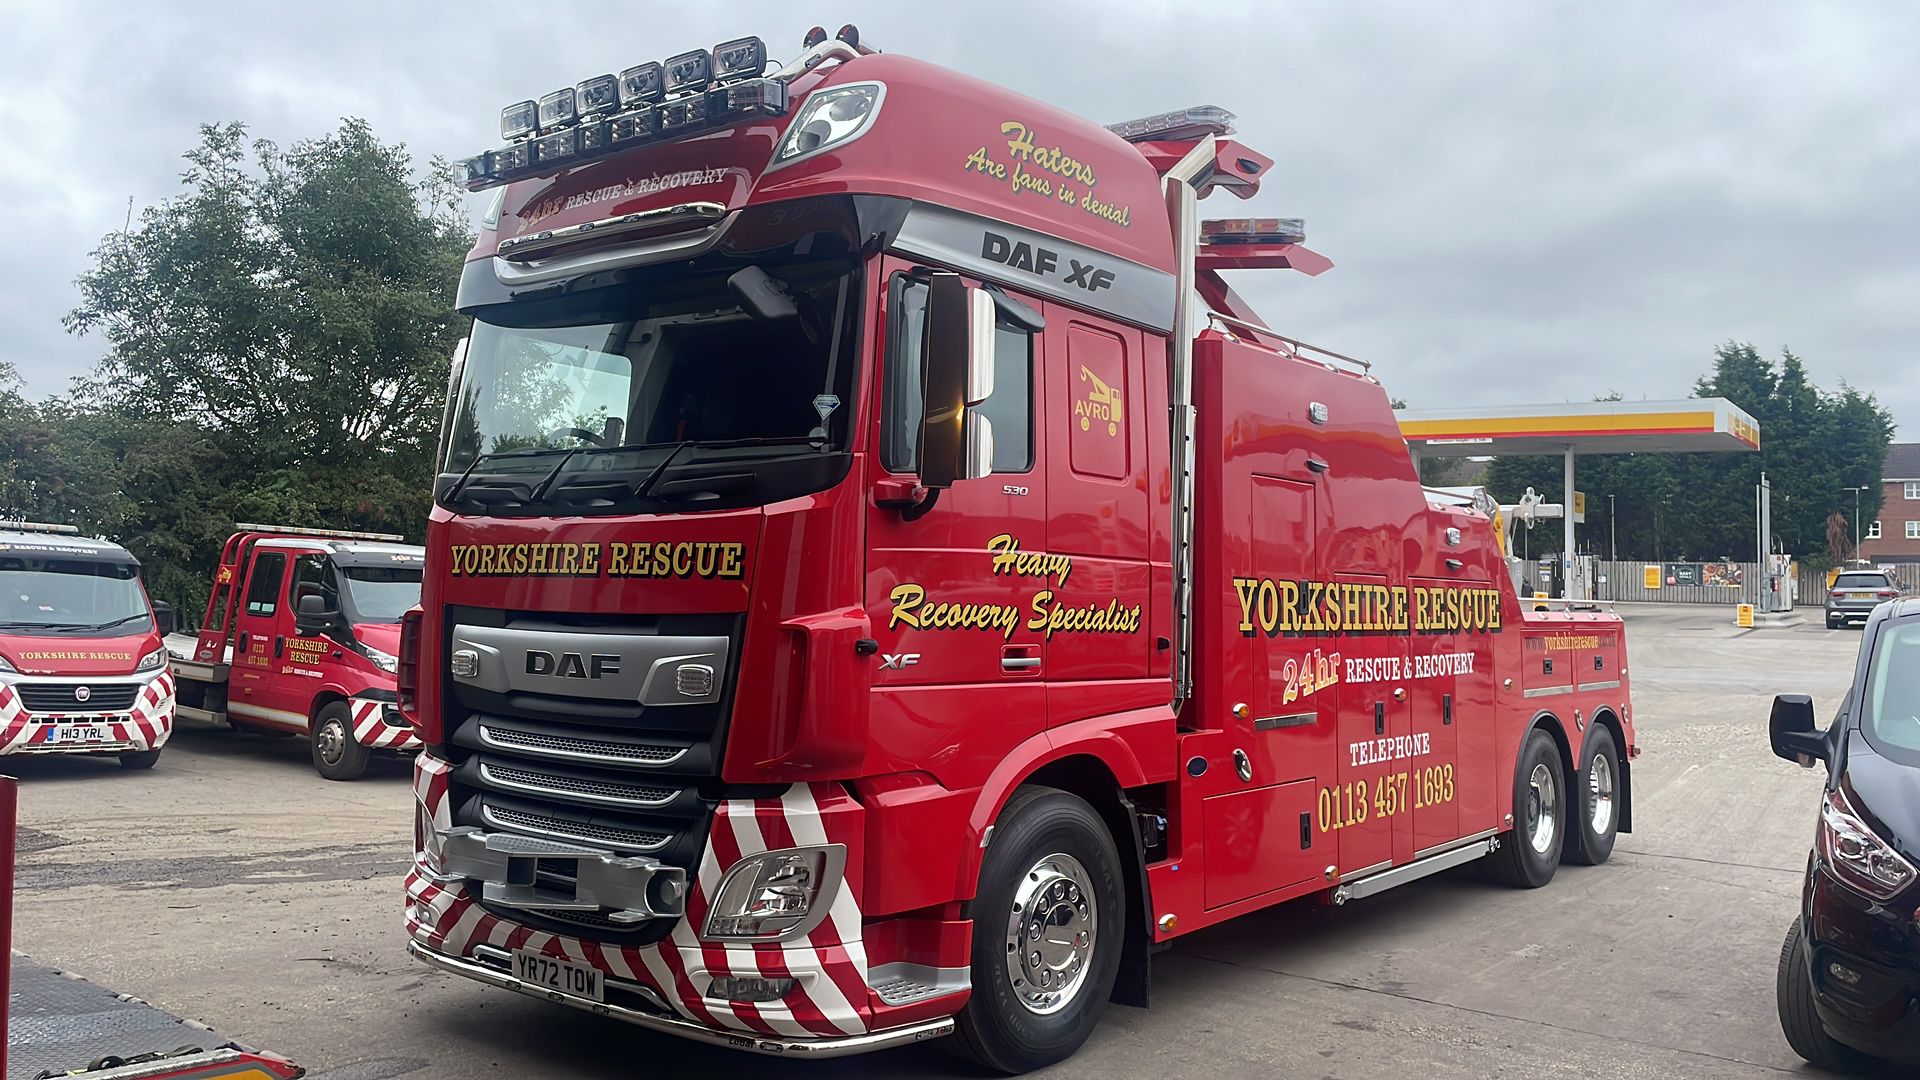 Boniface Supply 1st New Heavy For Yorkshire Rescue